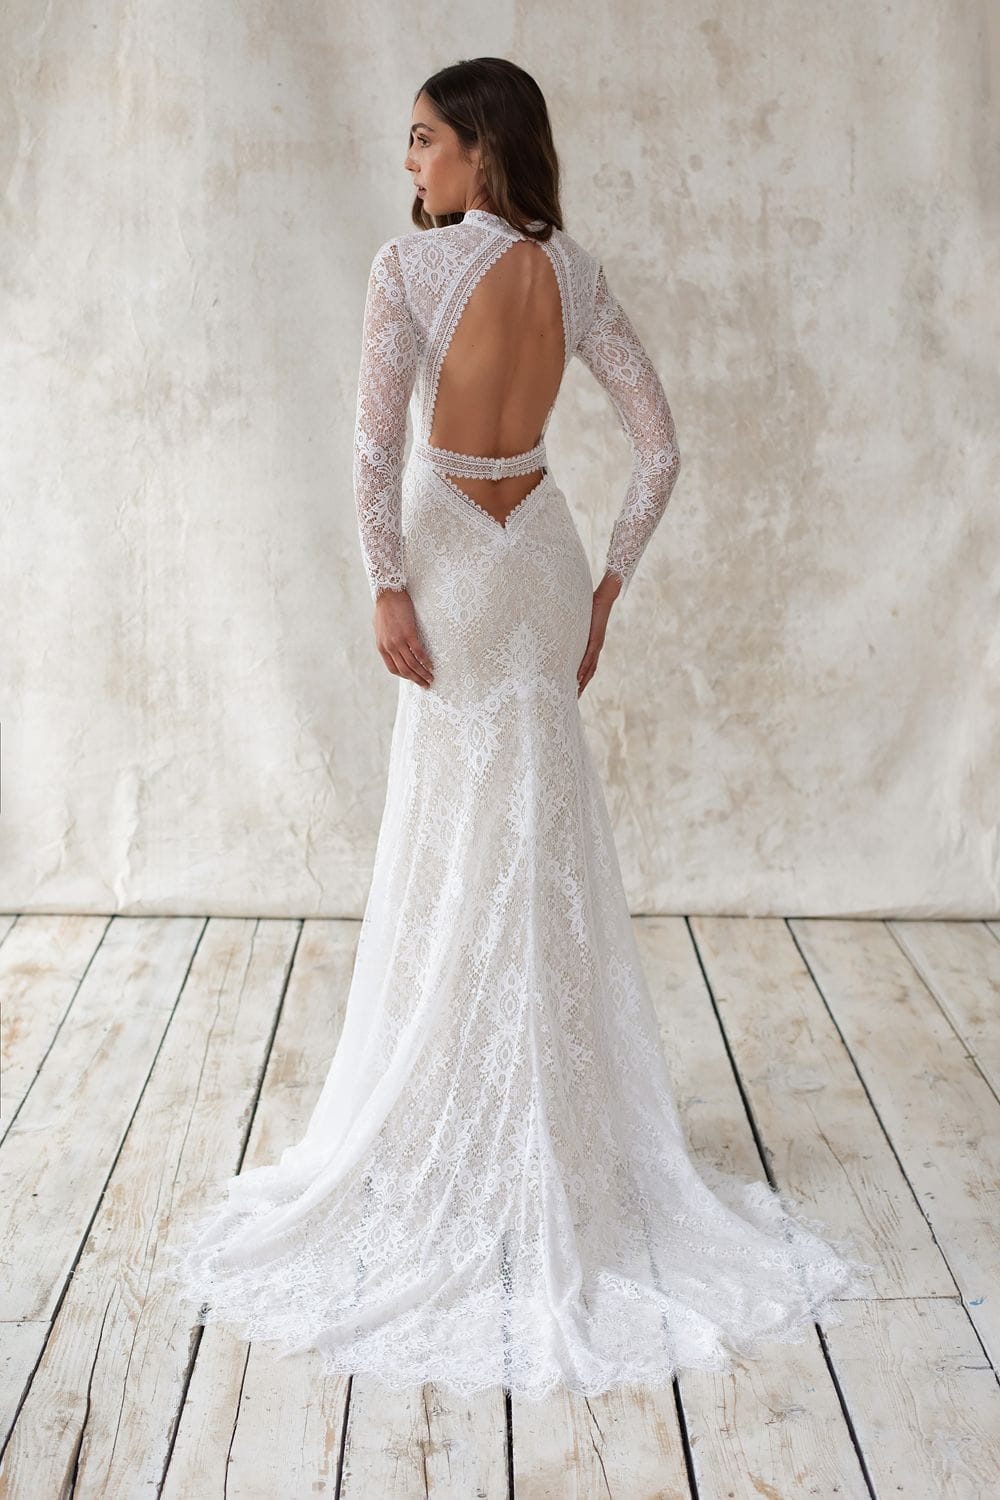 Lace Wedding Dresses | Lace Wedding Gowns | Sophia Tolli